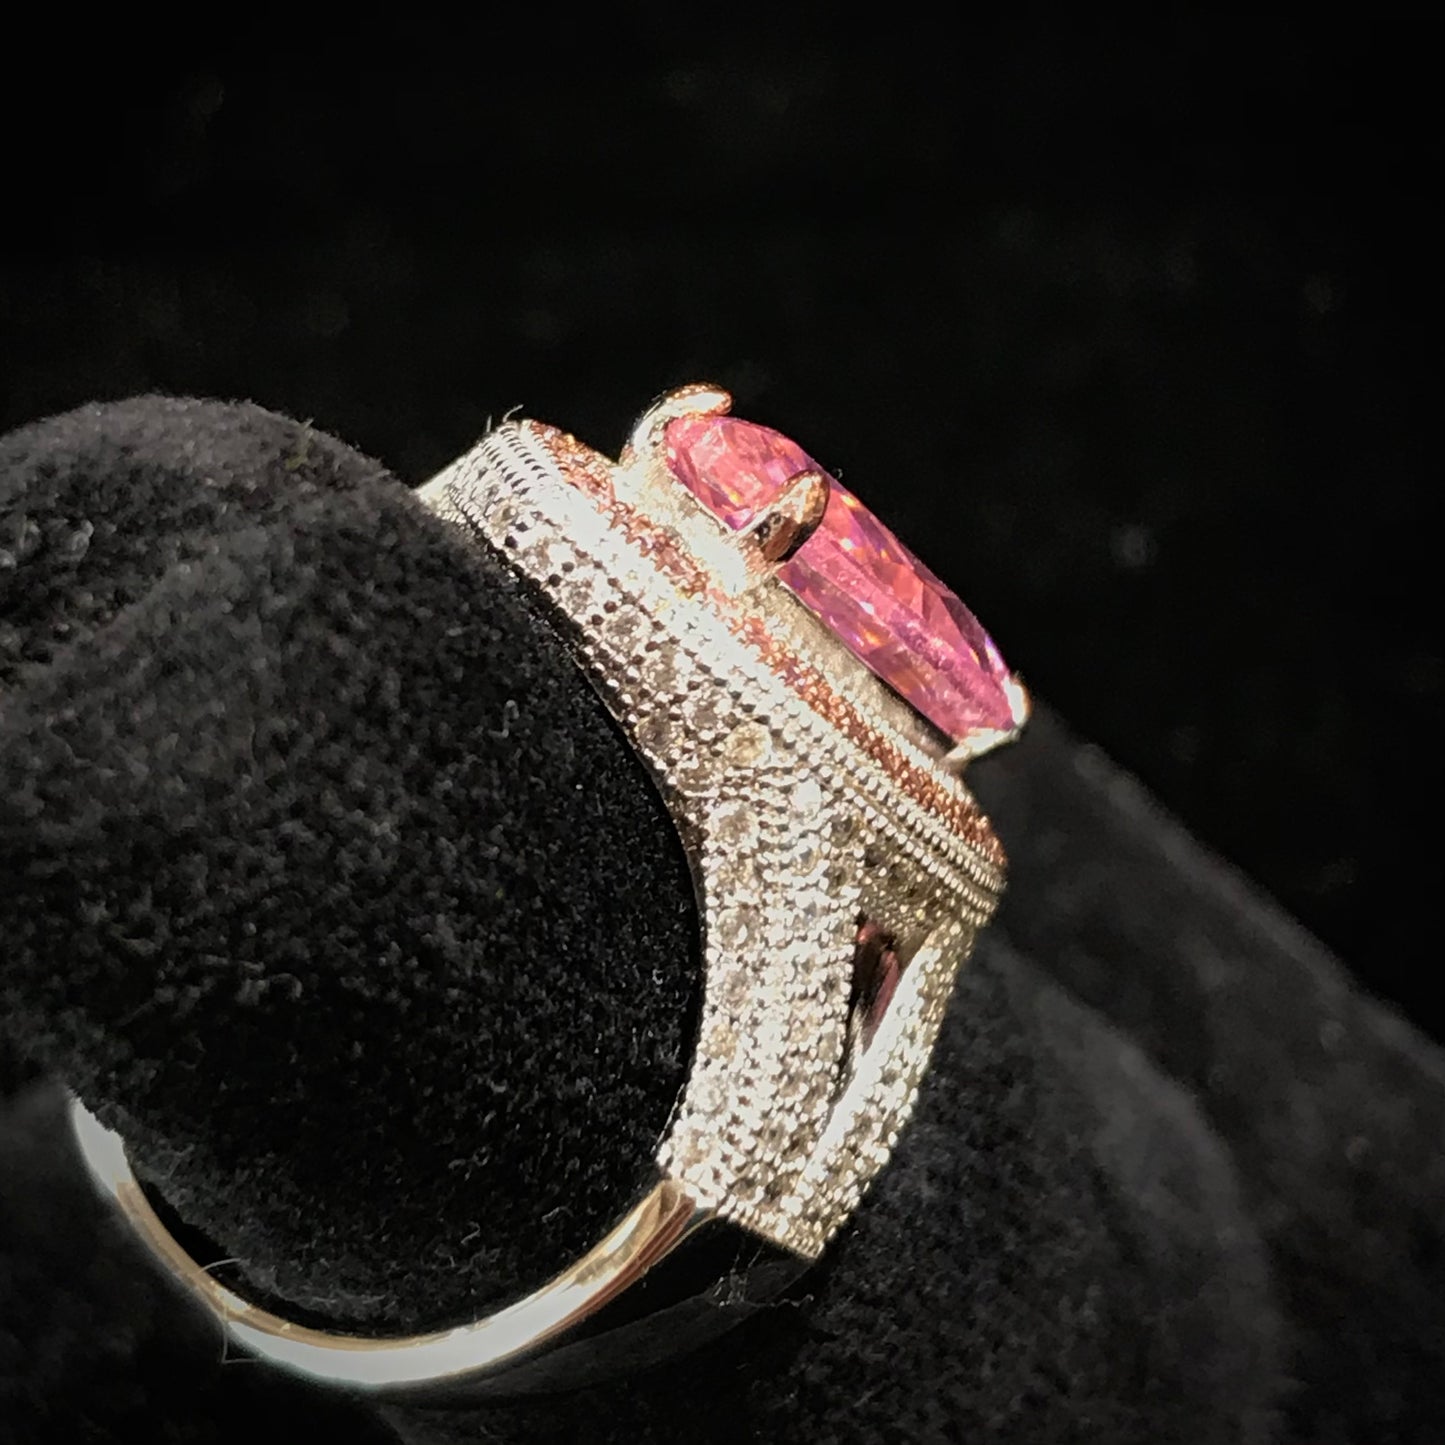 Pink marquee cubic zirconia ring set in sterling silver.